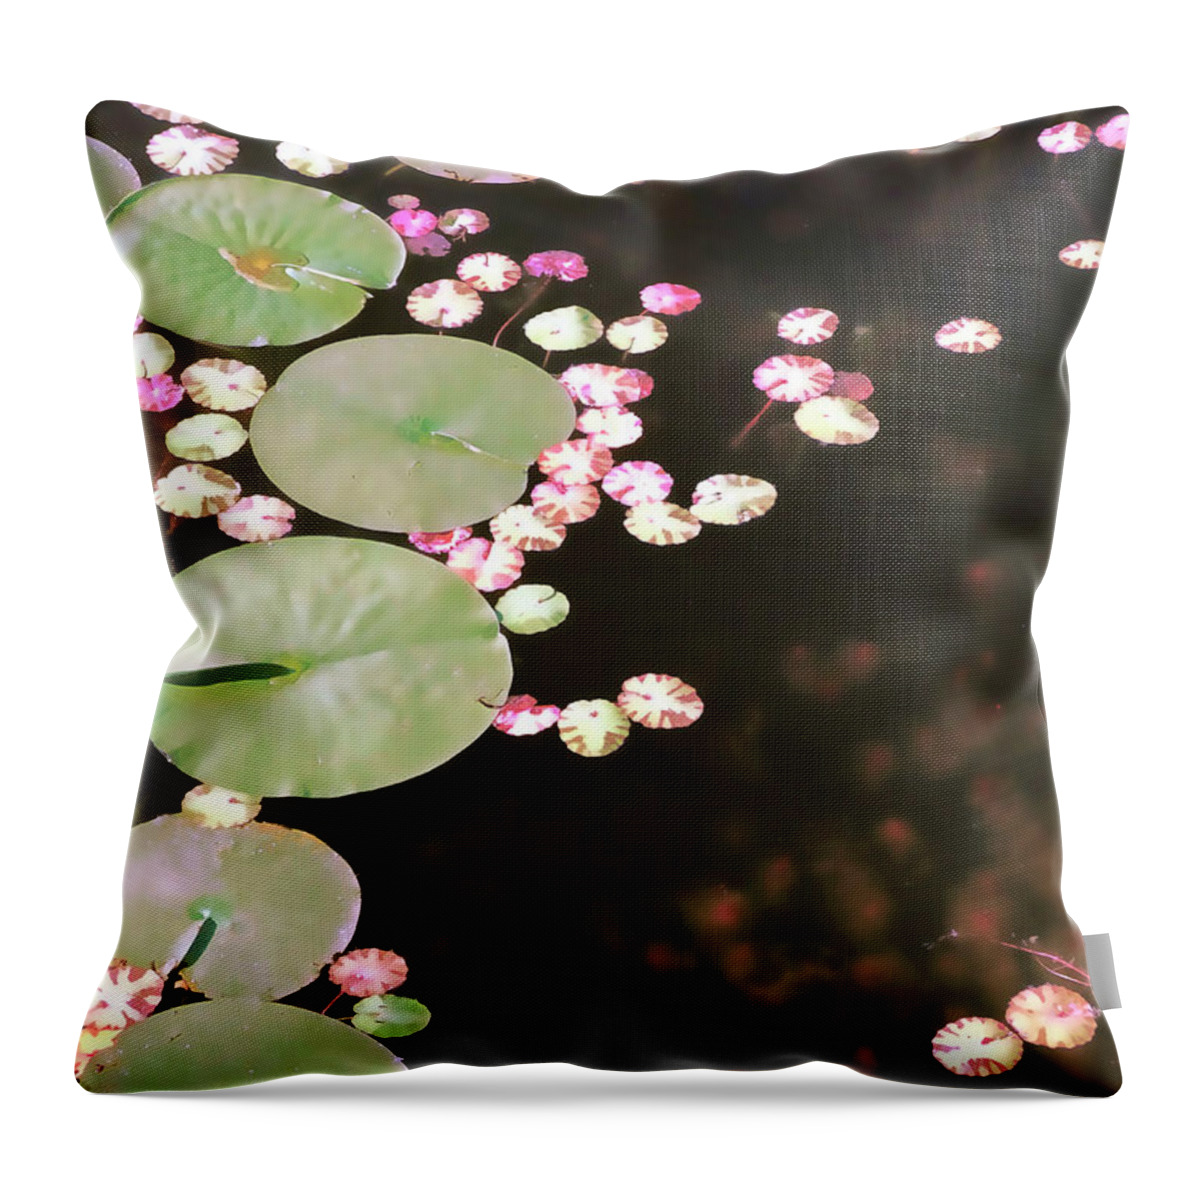 Lily Pads Throw Pillow featuring the photograph Fading Lily Pads by Maria Janicki